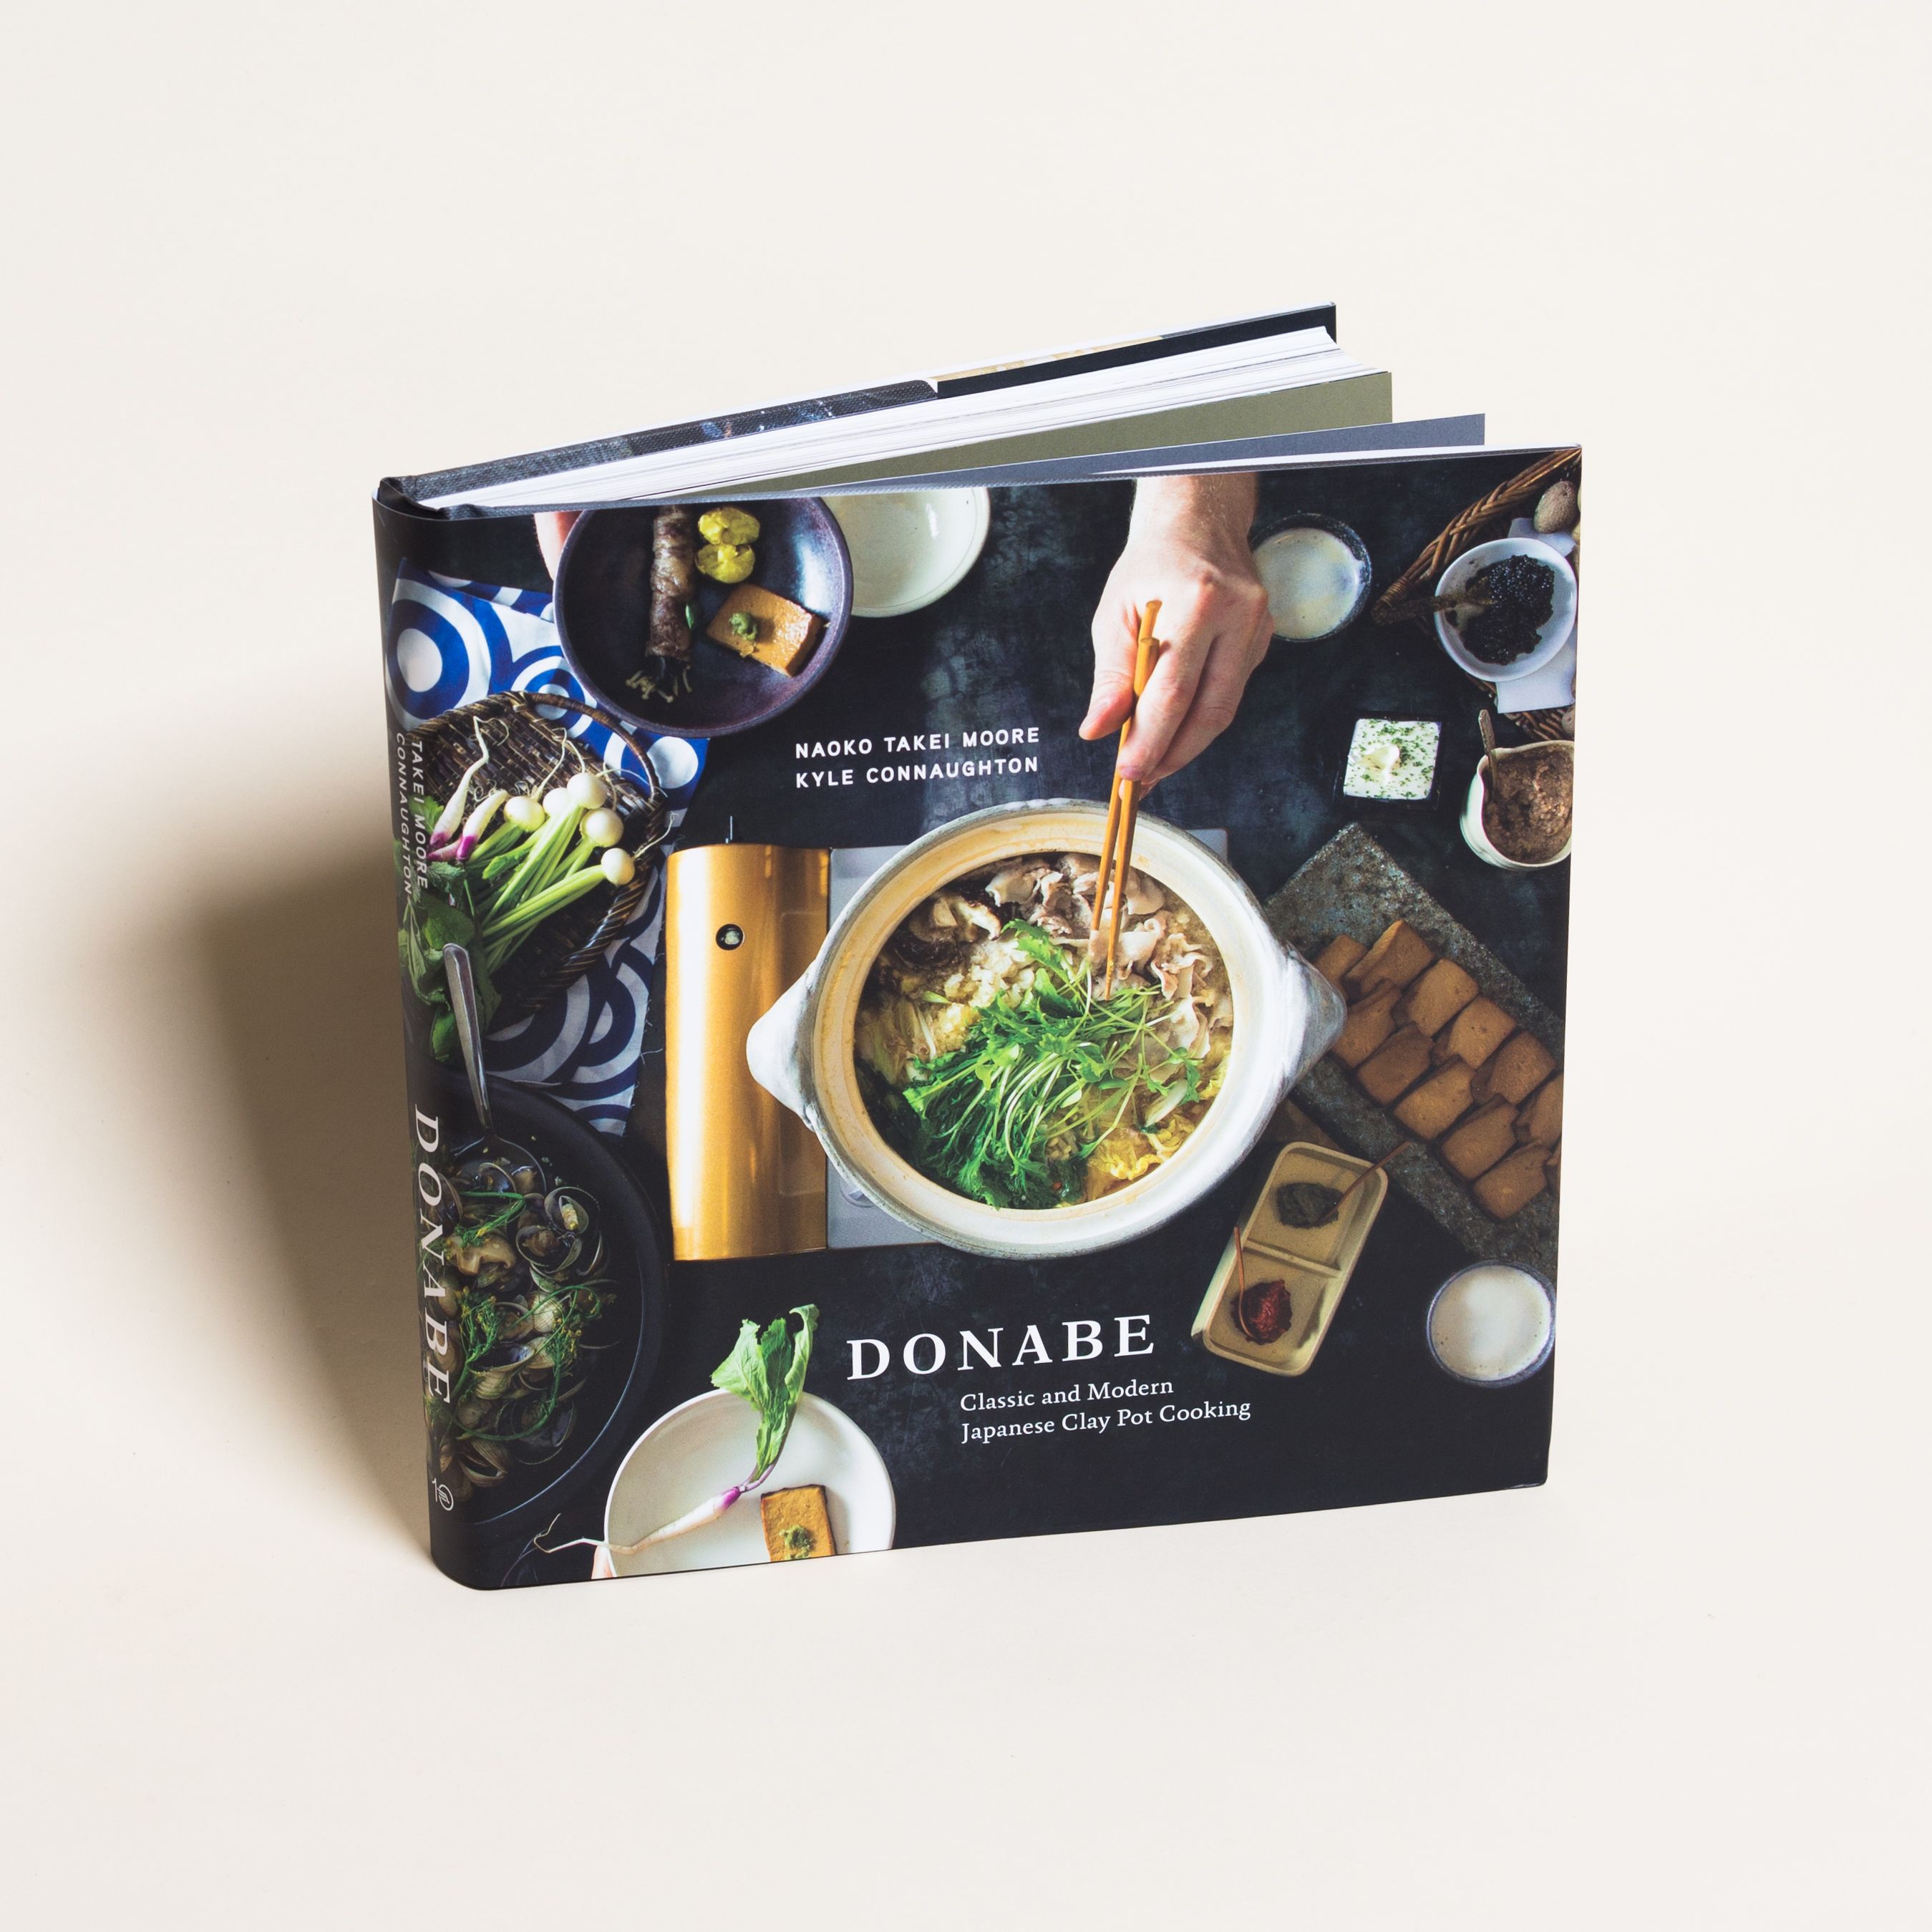 Front cover of "Donabe," showing a clay pot filled with soup and greens surrounded by bowls and ingredients, a hand reaching in with chopsticks